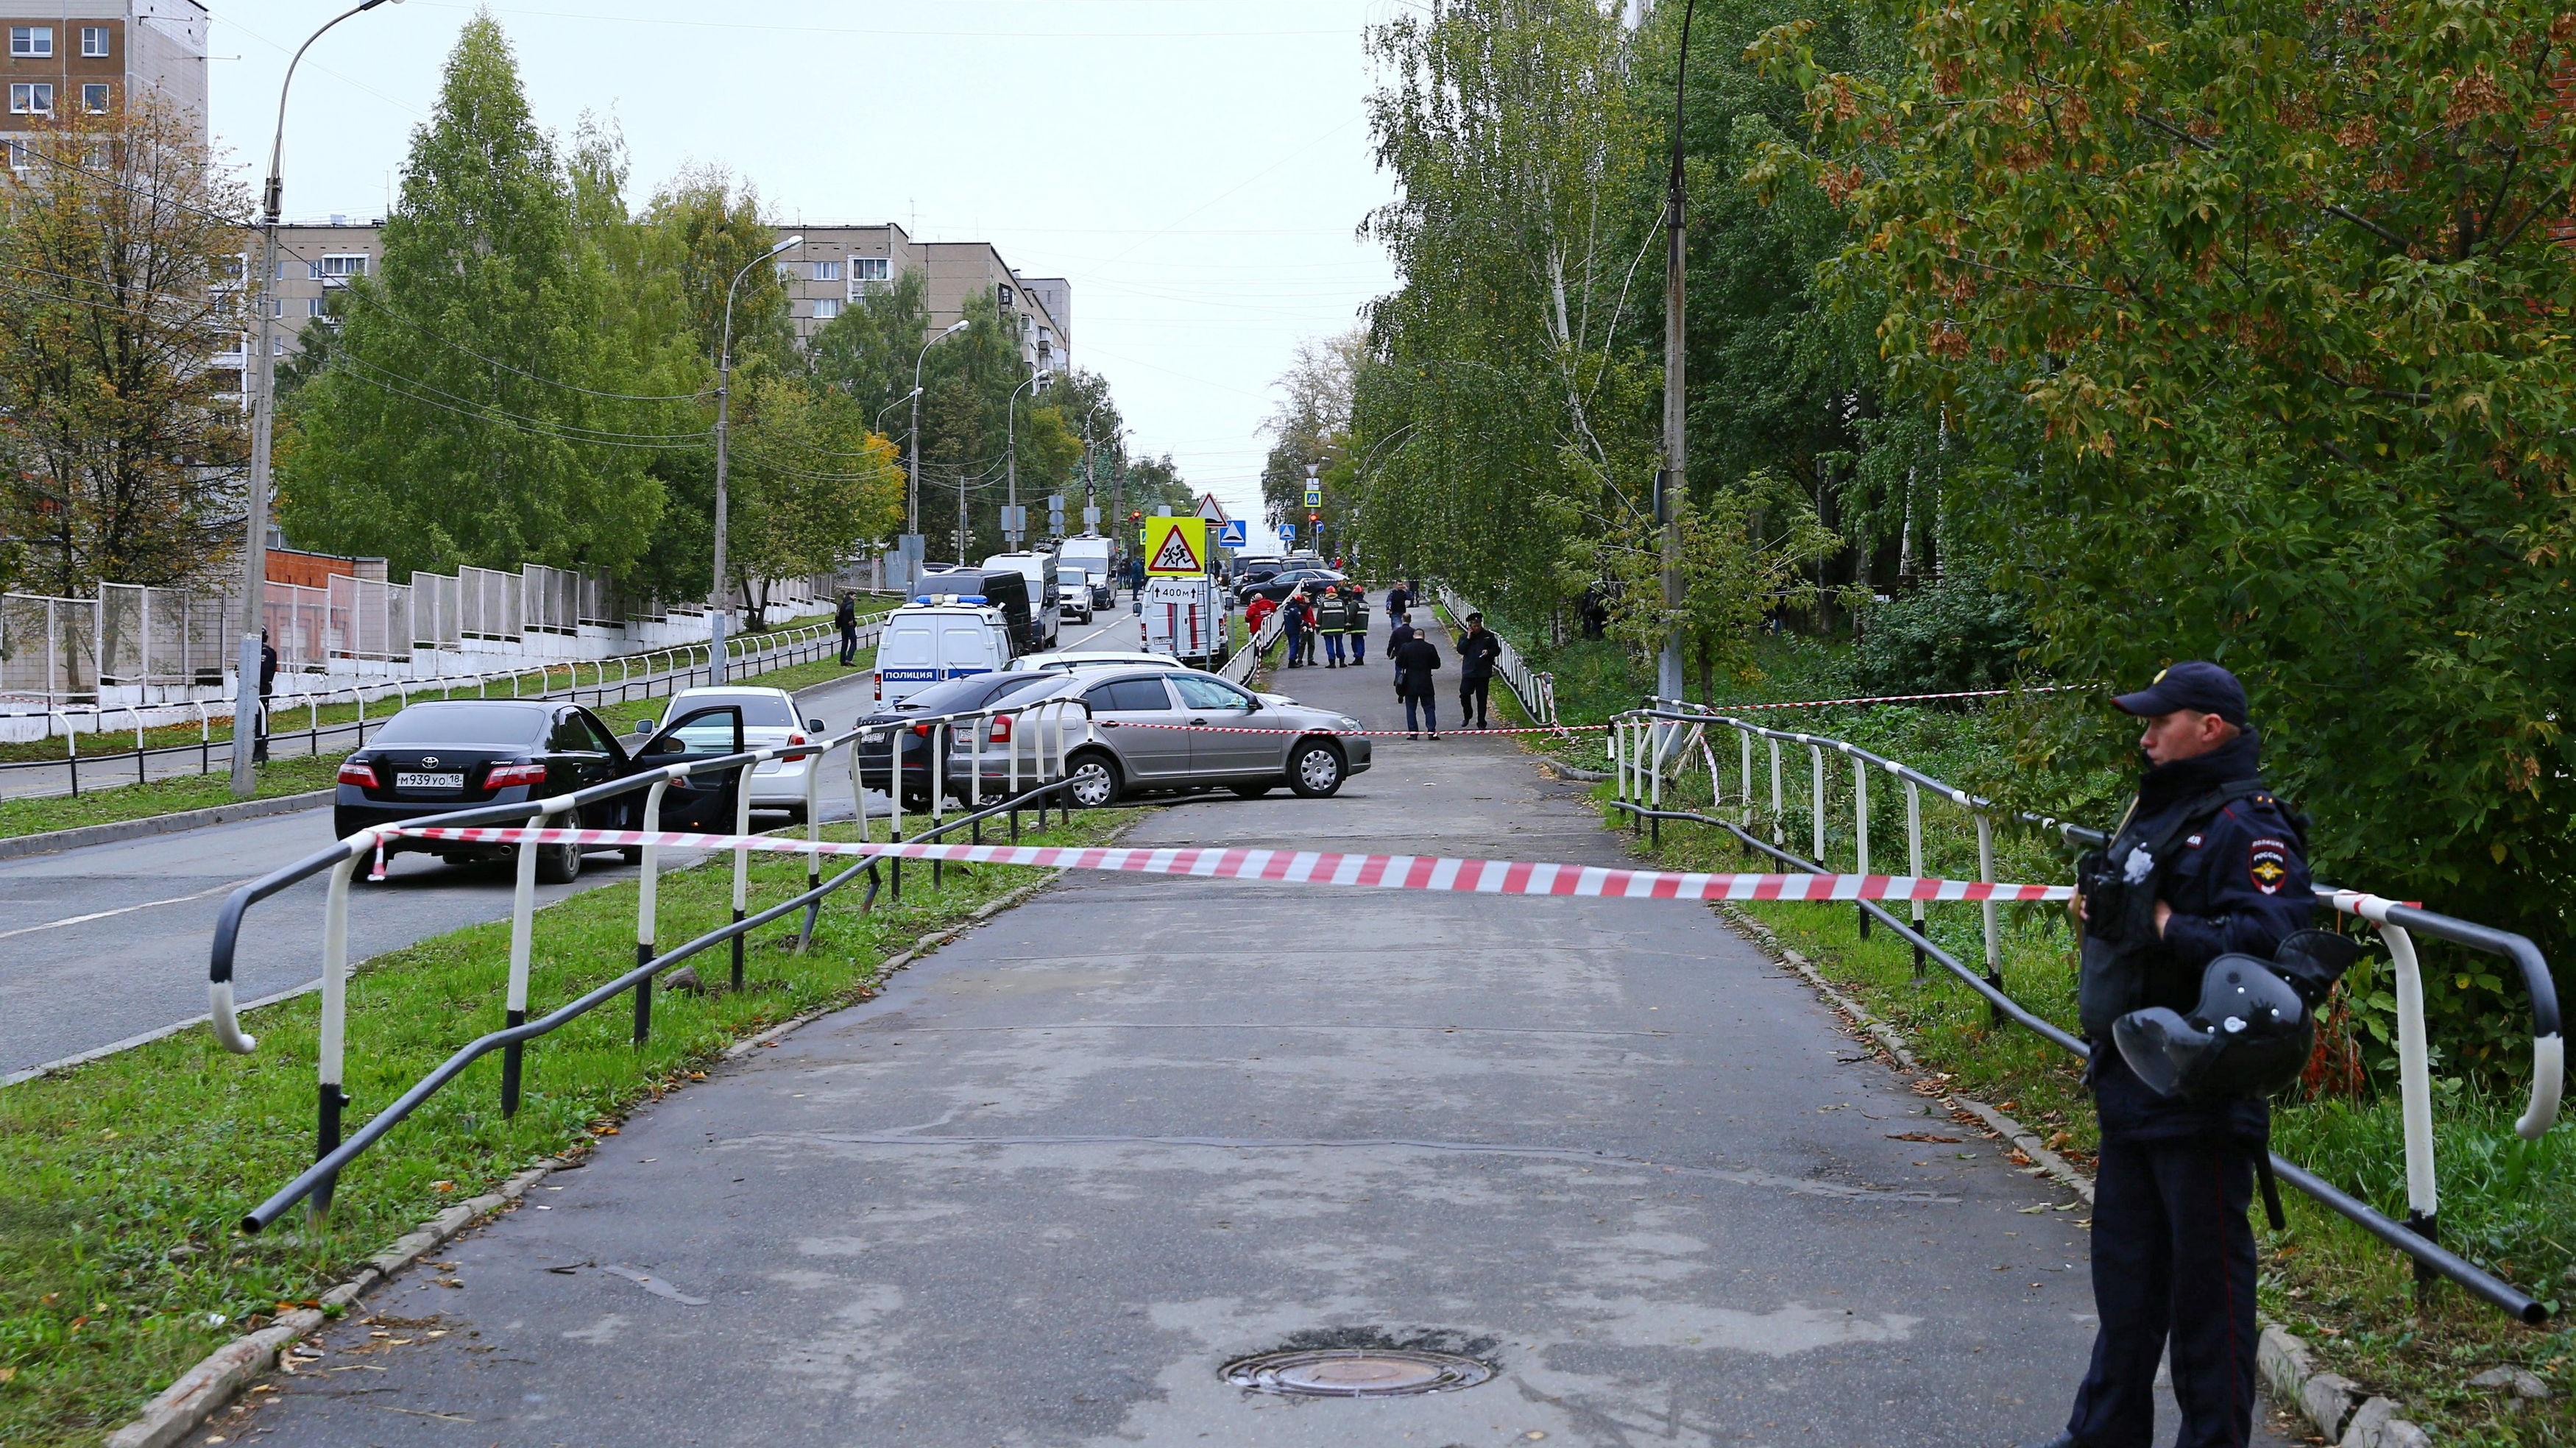 A police officer secures the area after a school shooting in Izhevsk, Russia, September 26, 2022. /Reuters